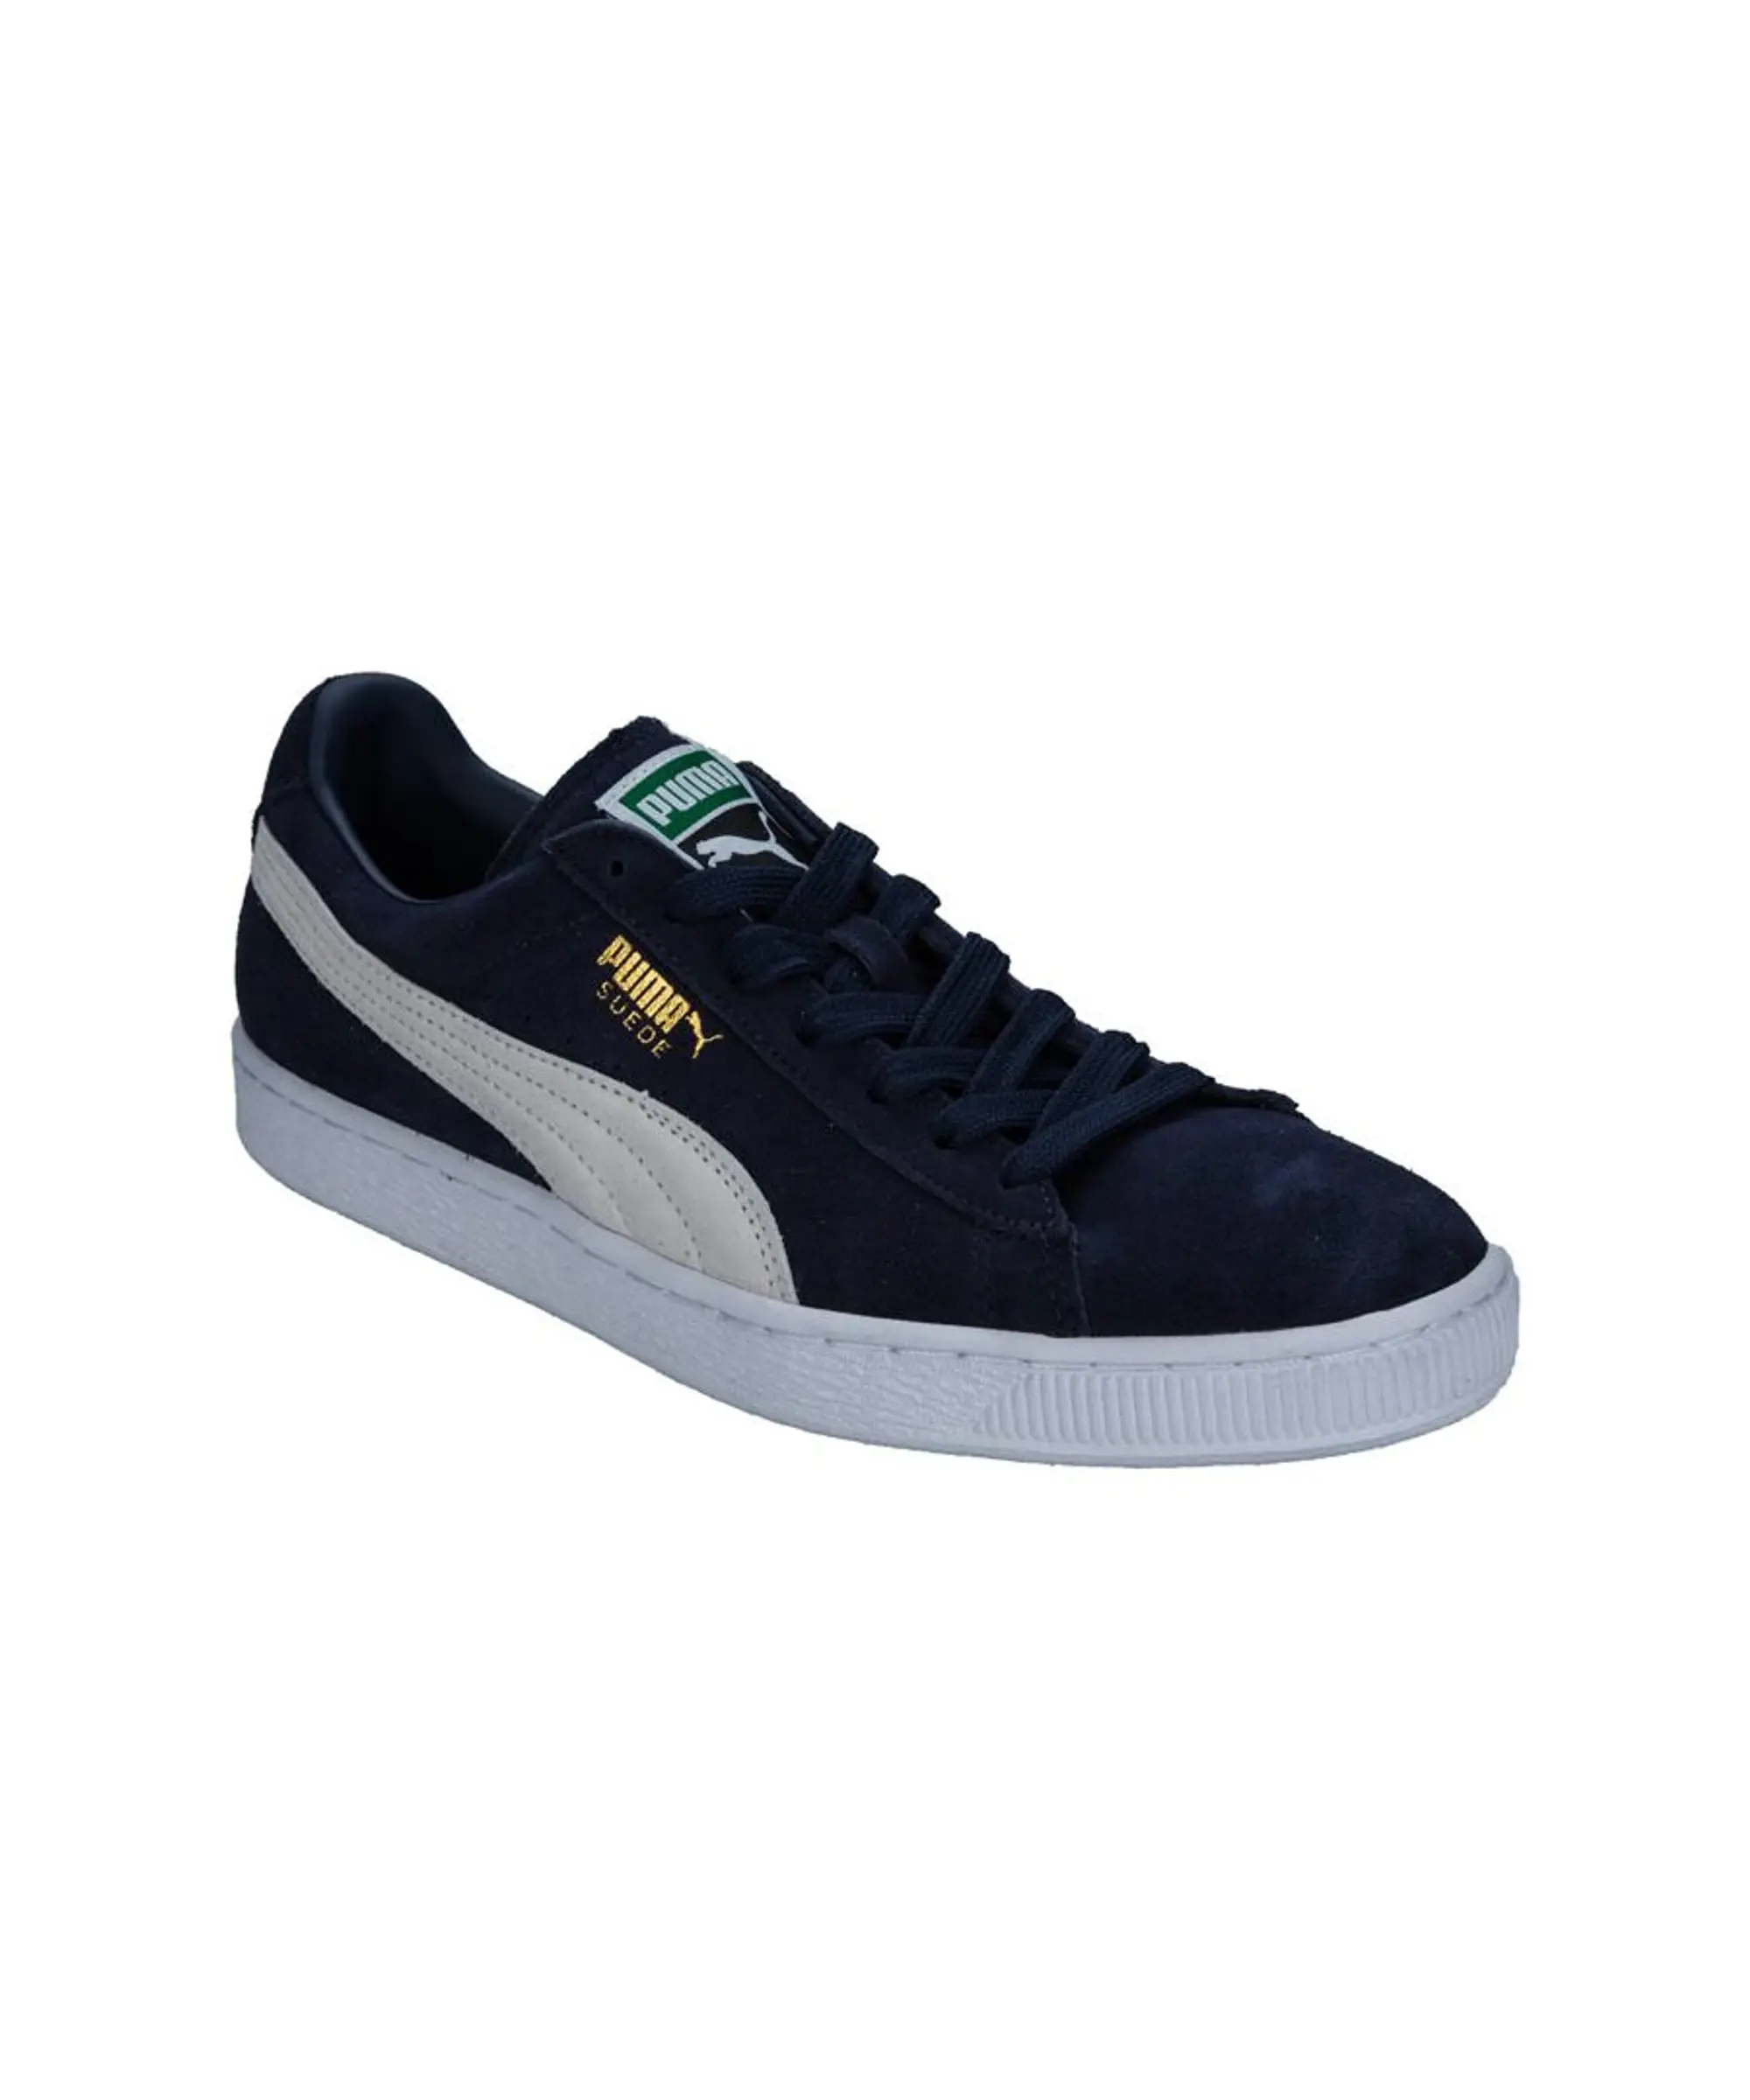 Puma Mens Suede Classic Trainers in Navy Leather